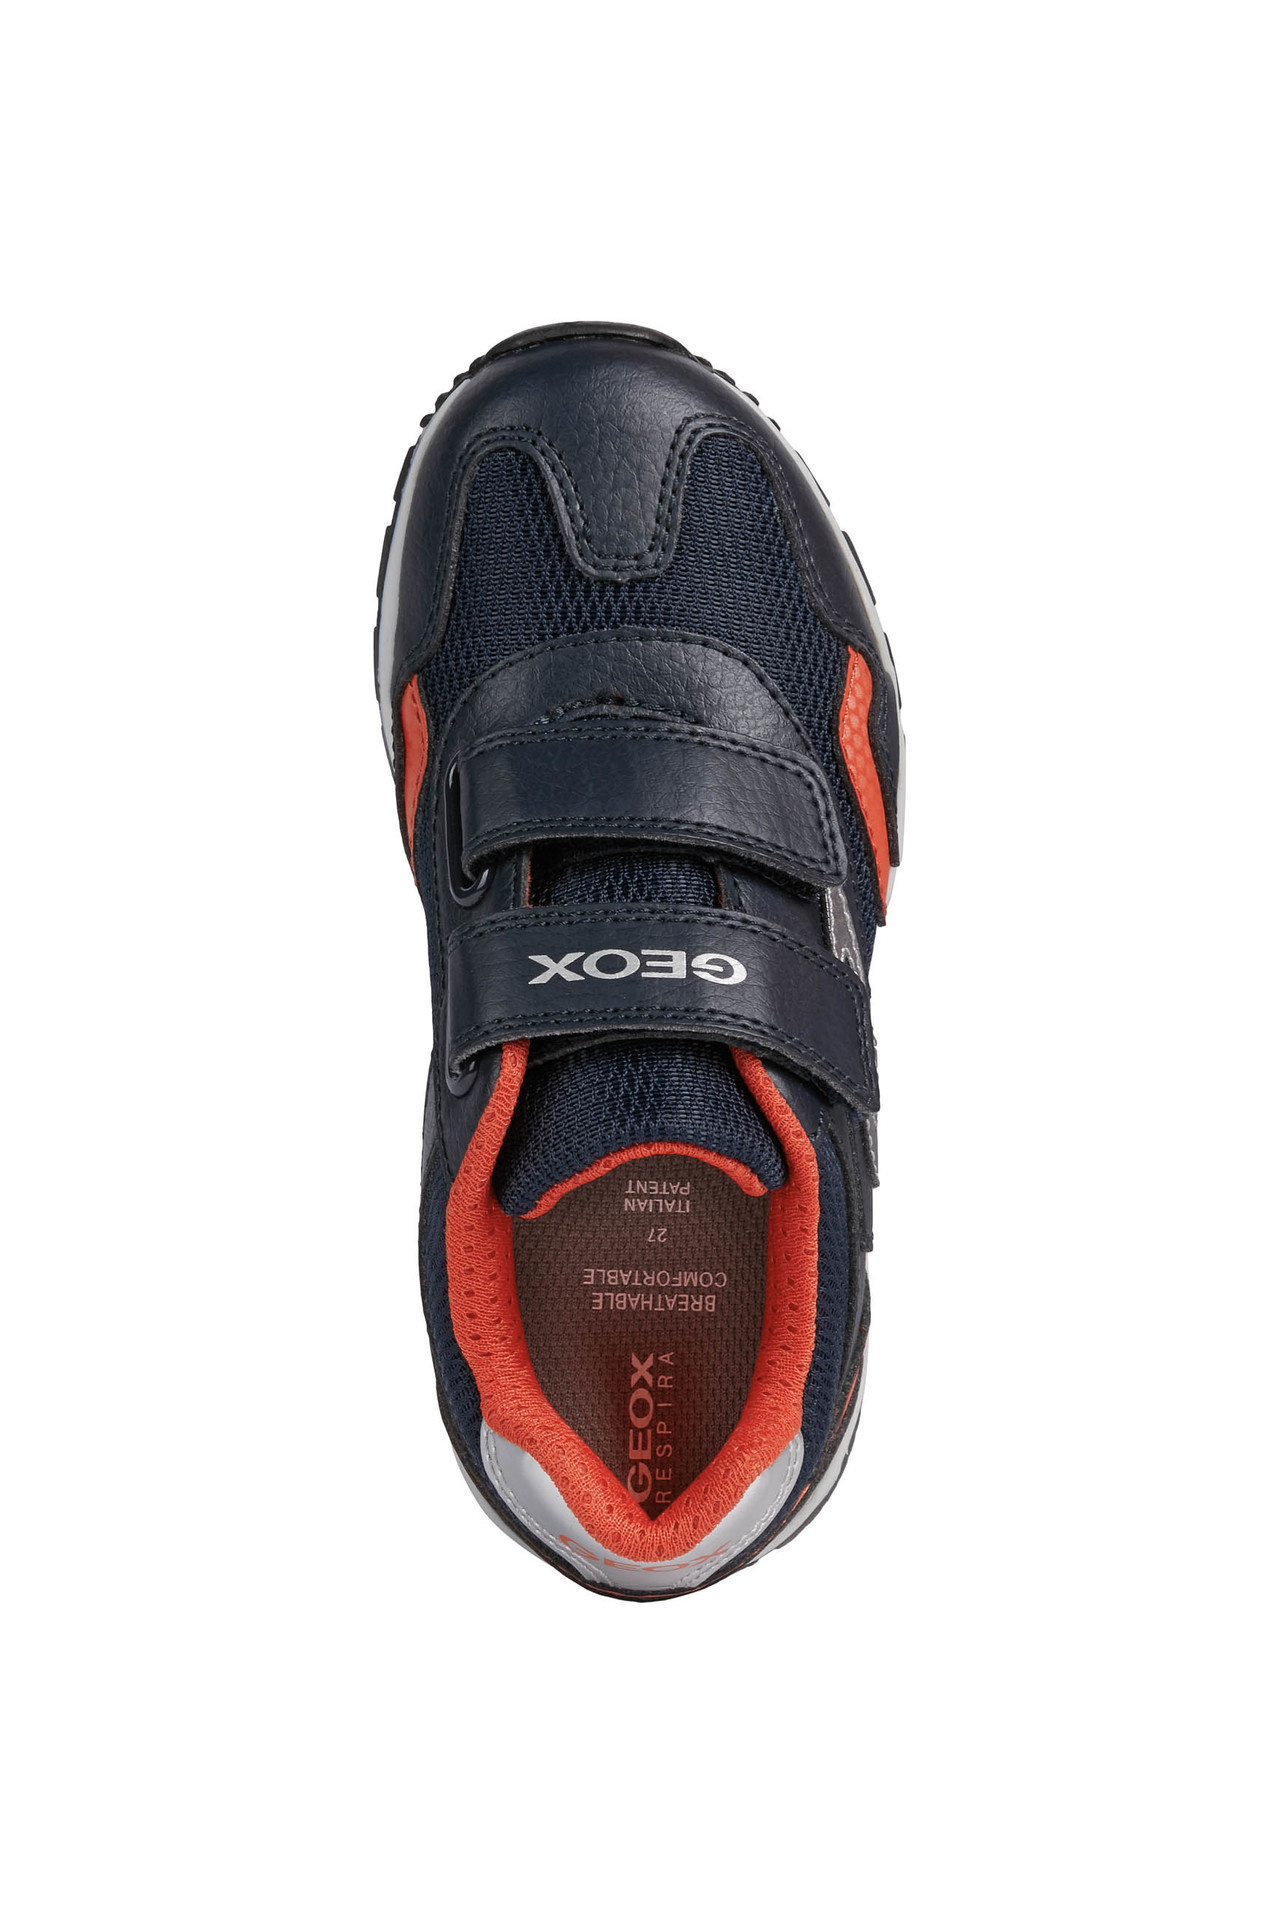 Geox Pavel Navy/Red